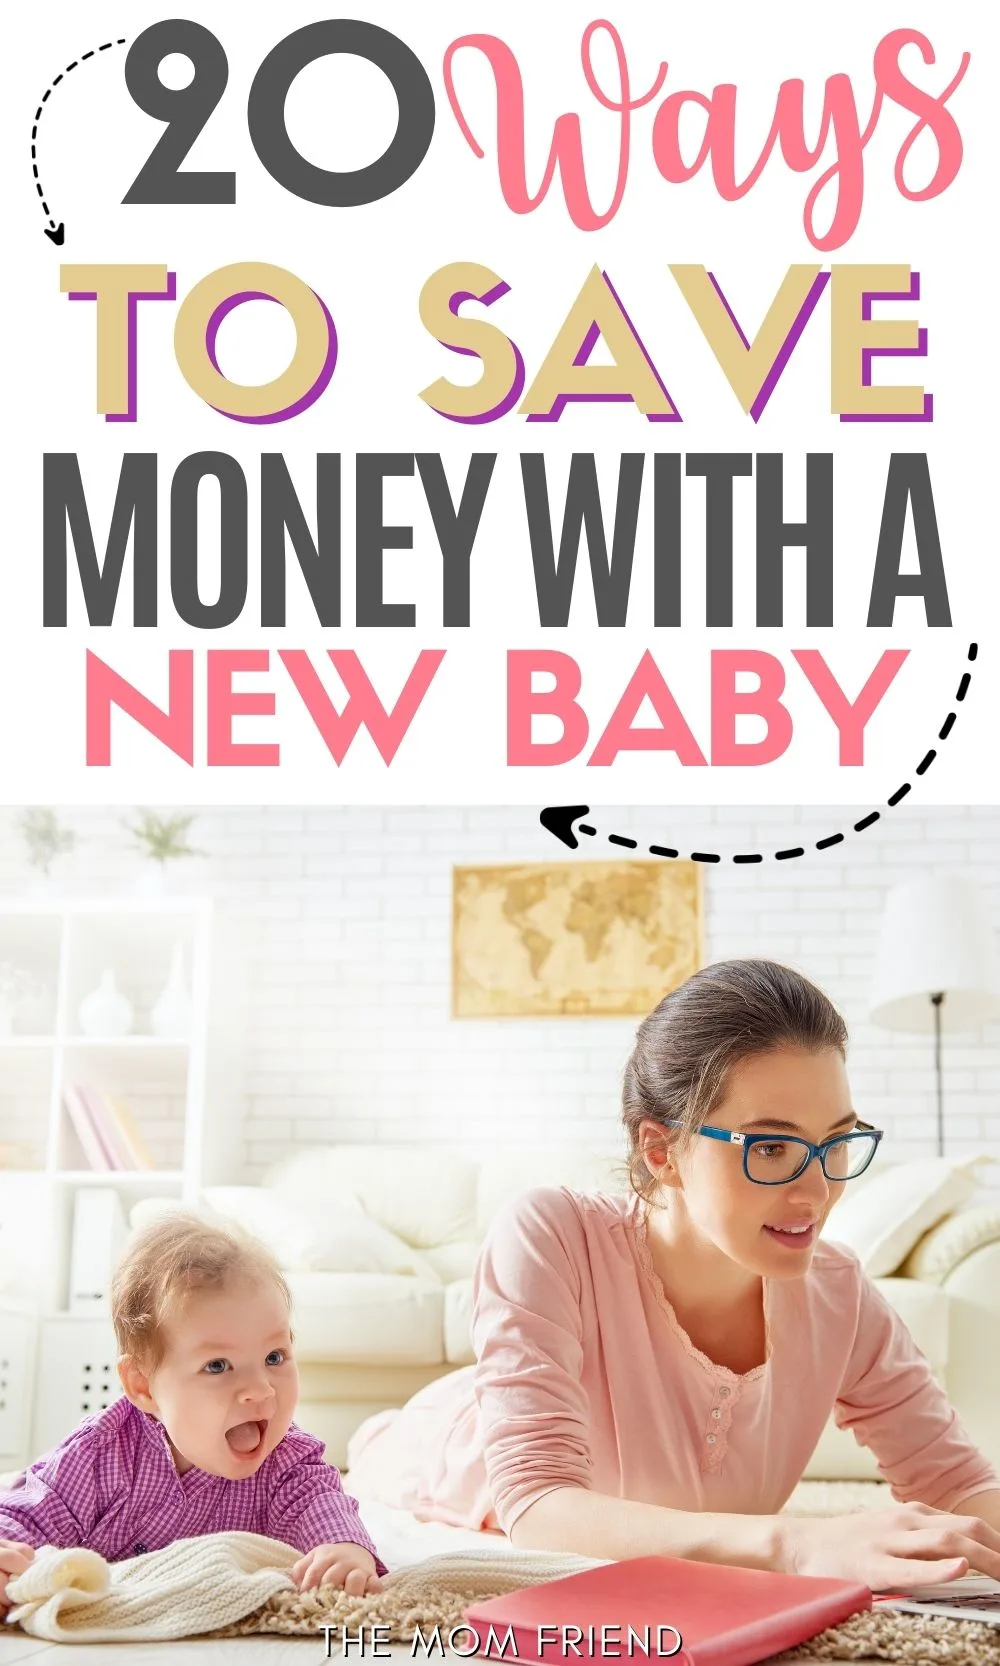 Pinterest graphic with text for ways to save money with a new baby and image of mom on computer next to baby.